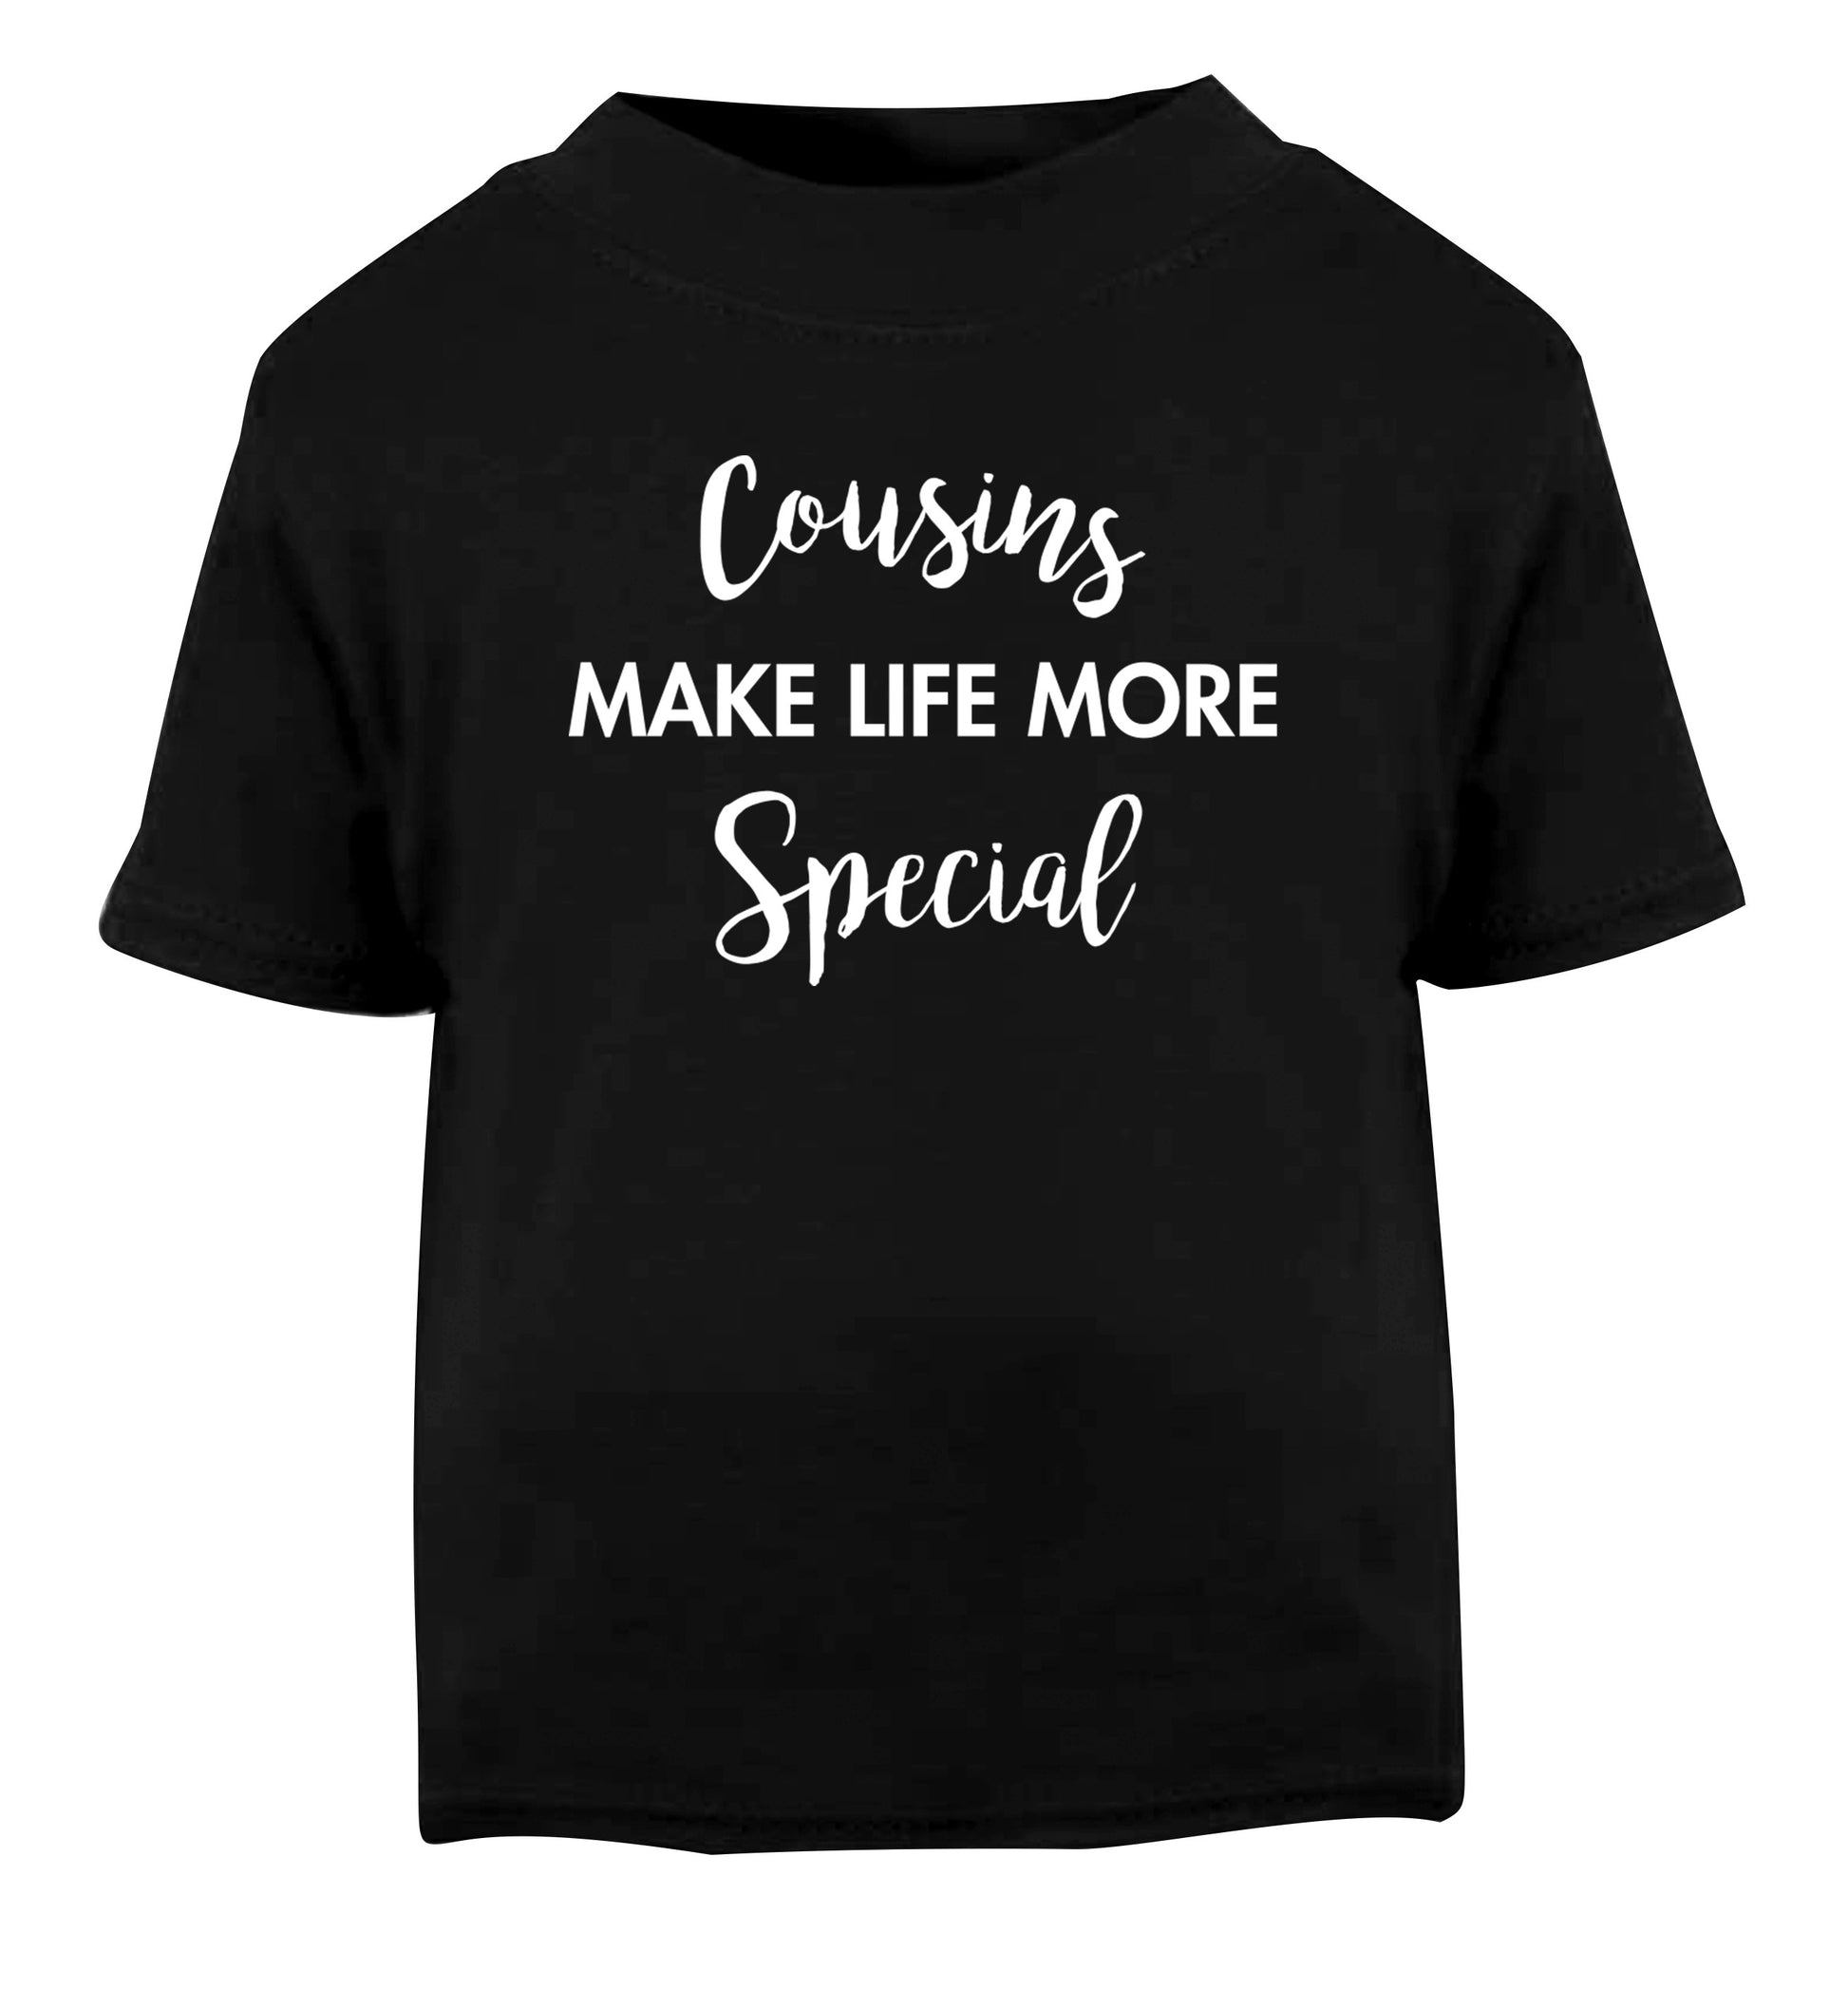 Cousins make life more special Black Baby Toddler Tshirt 2 years